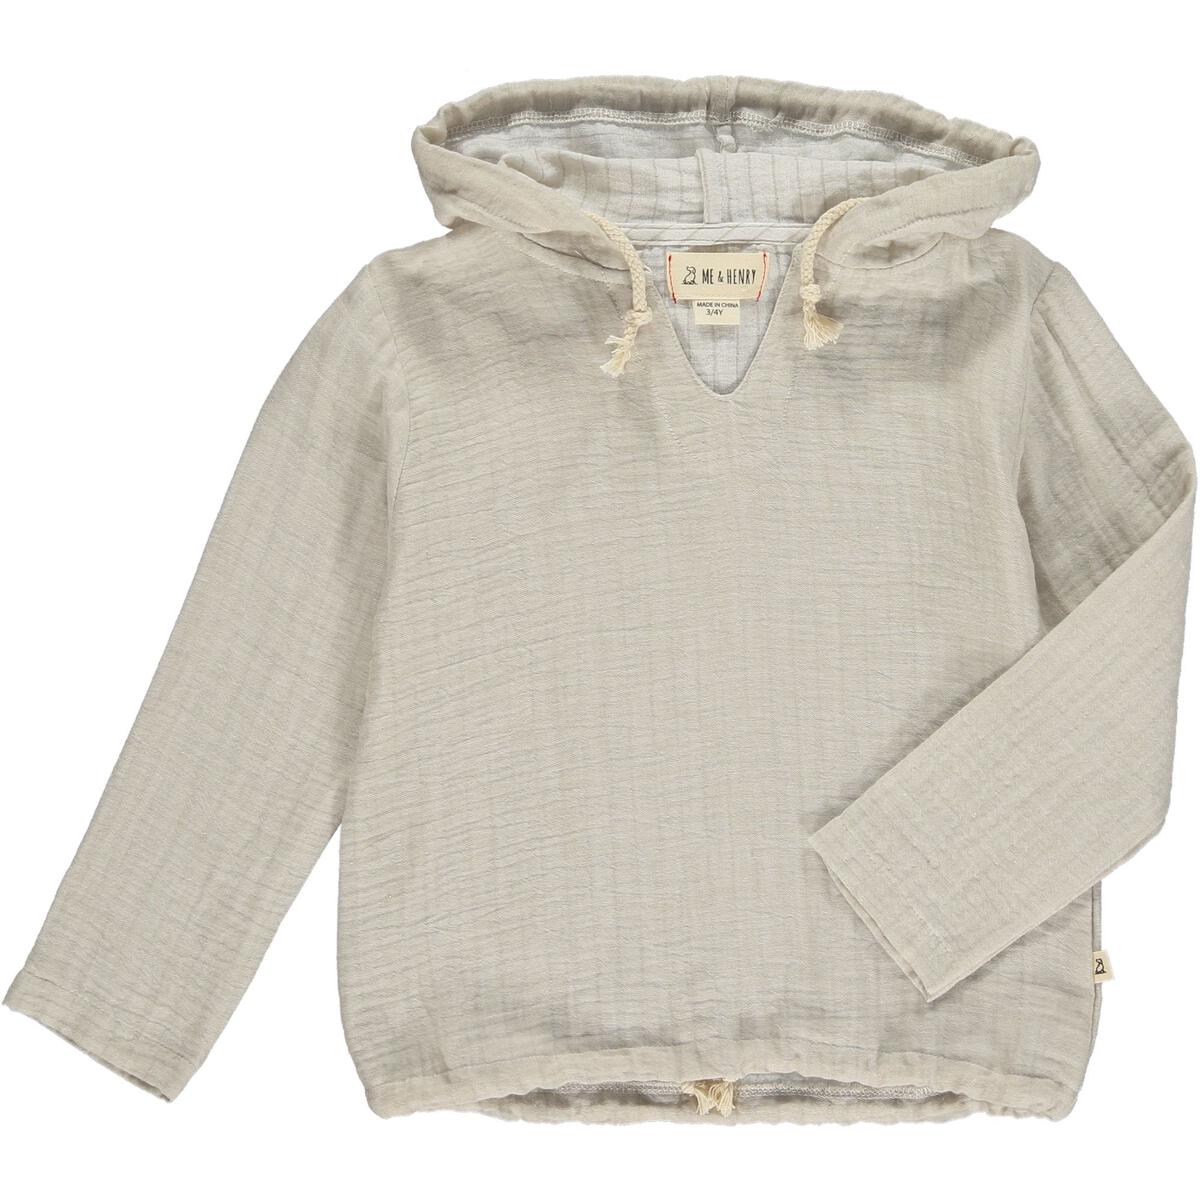 ST. IVES Hooded Top, Stone